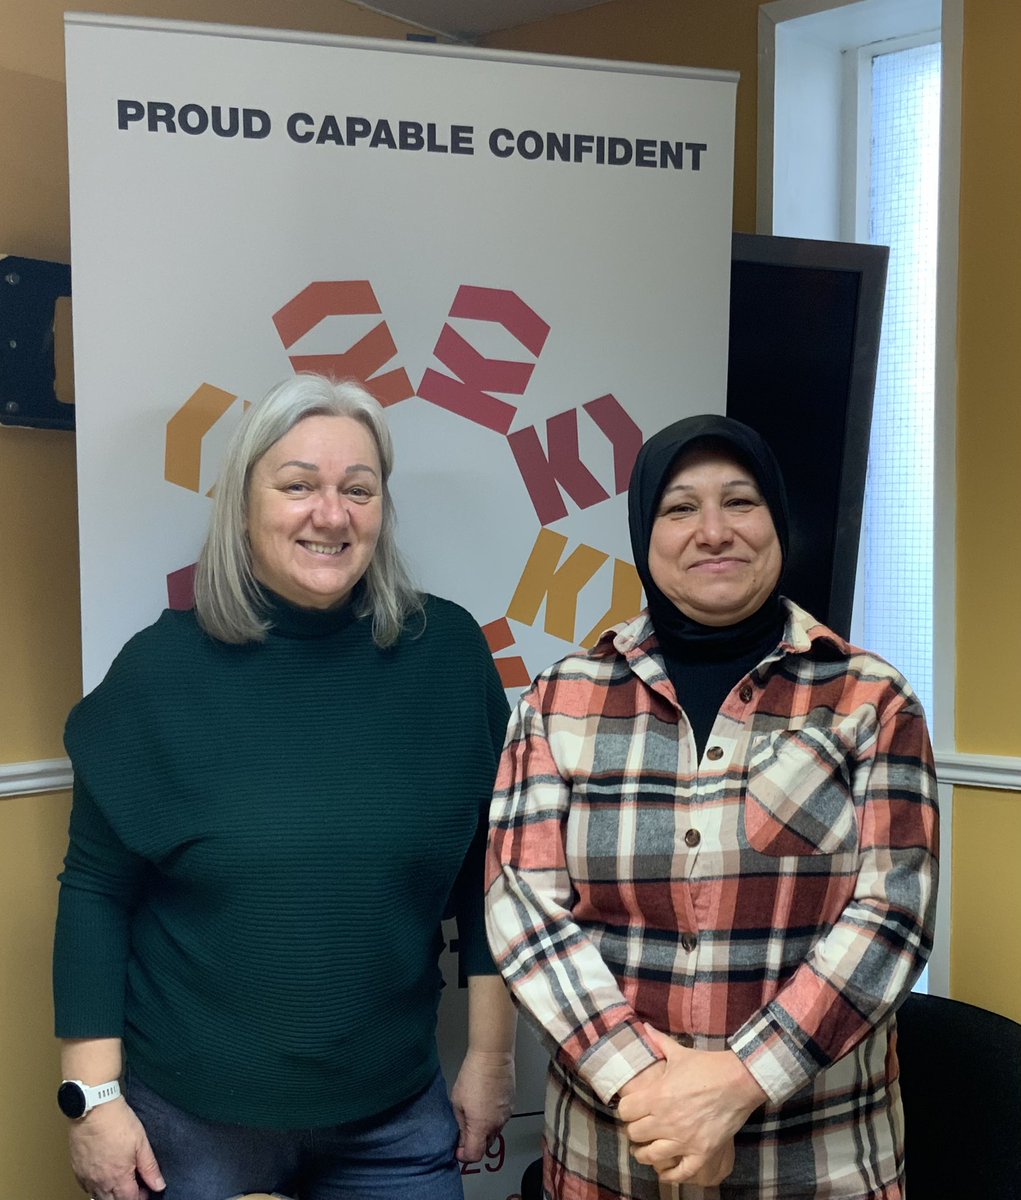 We had a fantastic #intergenerational connections workshop with The Kurdish Women’s group on Saturday looking forward to next weeks workshop where we are exploring IG connections and community safety @UKRI_News @youngfoundation #CommunityKnowledgeFund